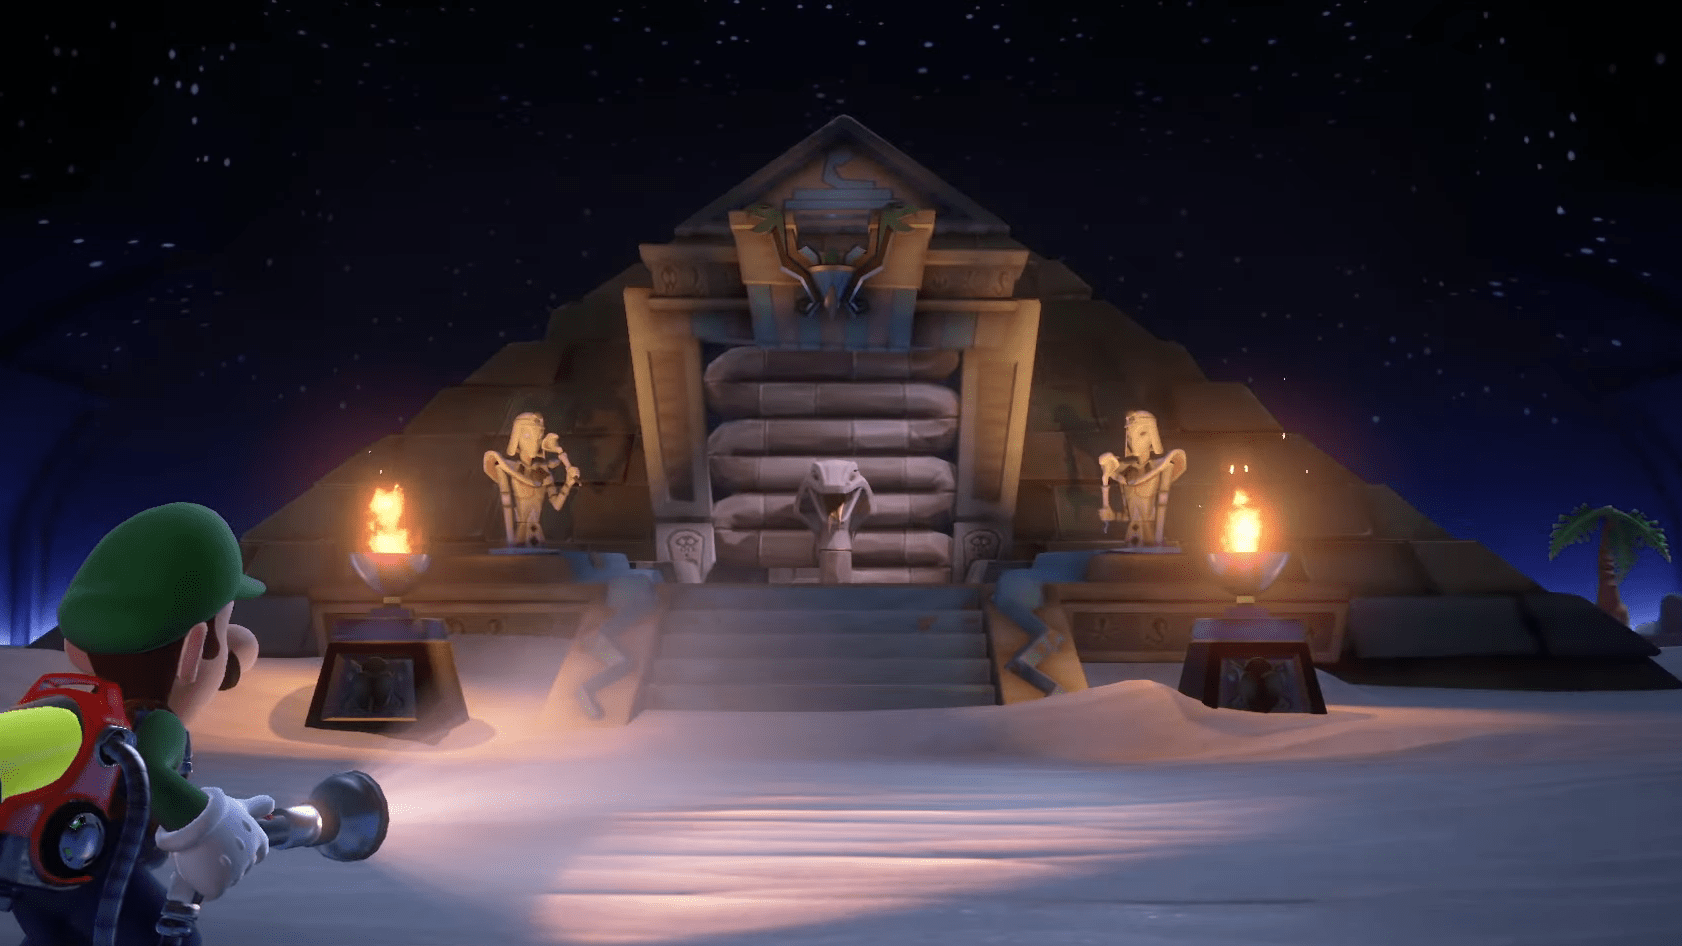 Two New Packs Of Additional Content Are Coming To Luigi’s Mansion 3 Next Year